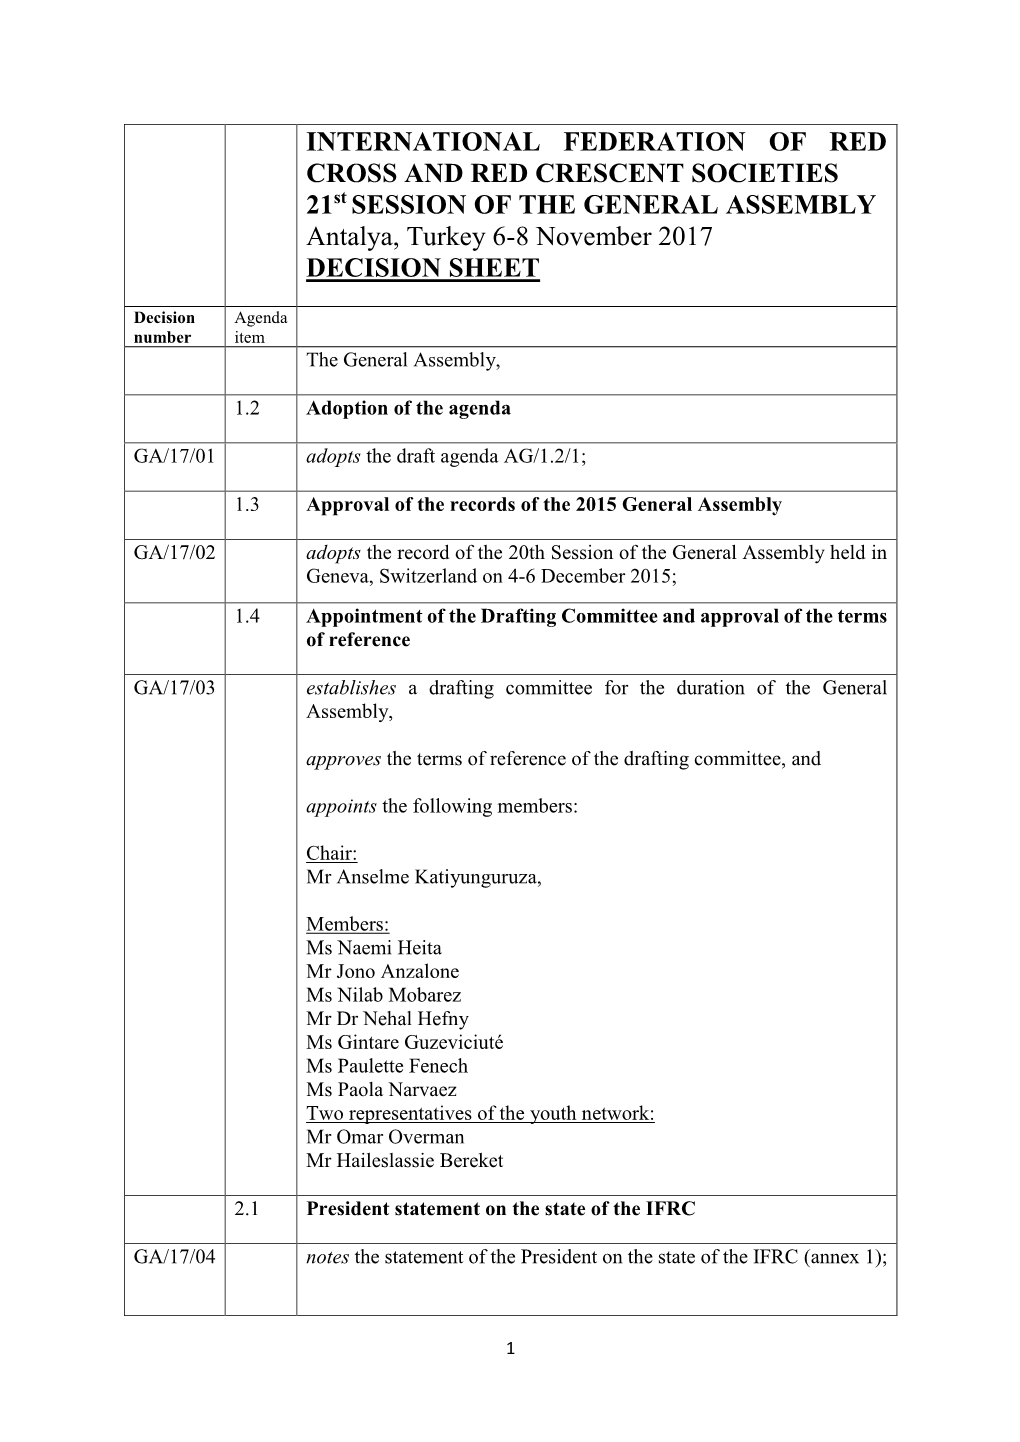 INTERNATIONAL FEDERATION of RED CROSS and RED CRESCENT SOCIETIES 21St SESSION of the GENERAL ASSEMBLY Antalya, Turkey 6-8 November 2017 DECISION SHEET